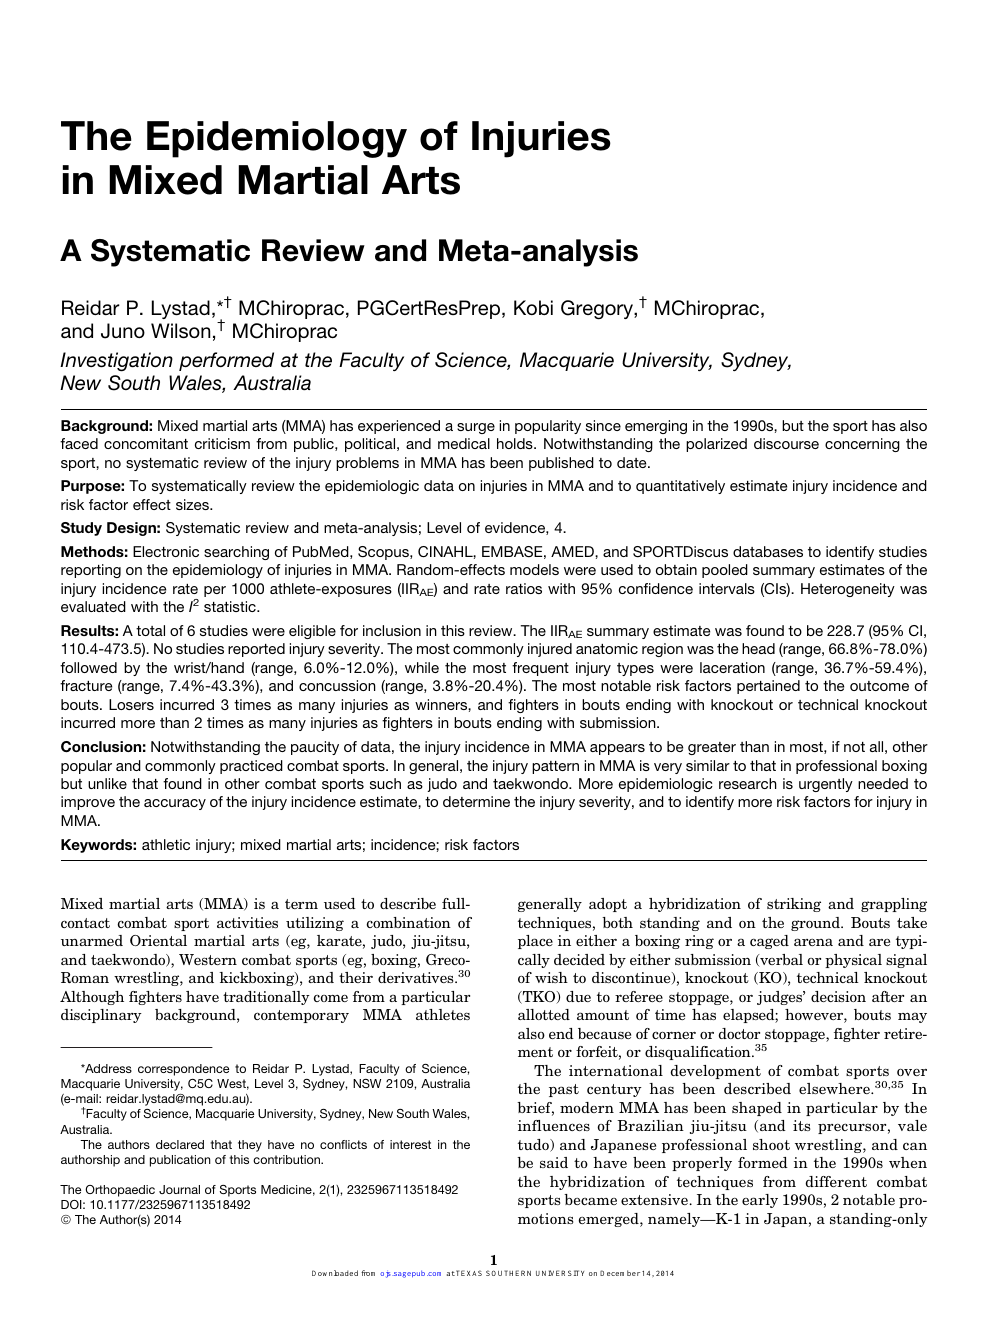 The Epidemiology of Injuries in Mixed Martial Arts A Systematic Review and Meta-analysis